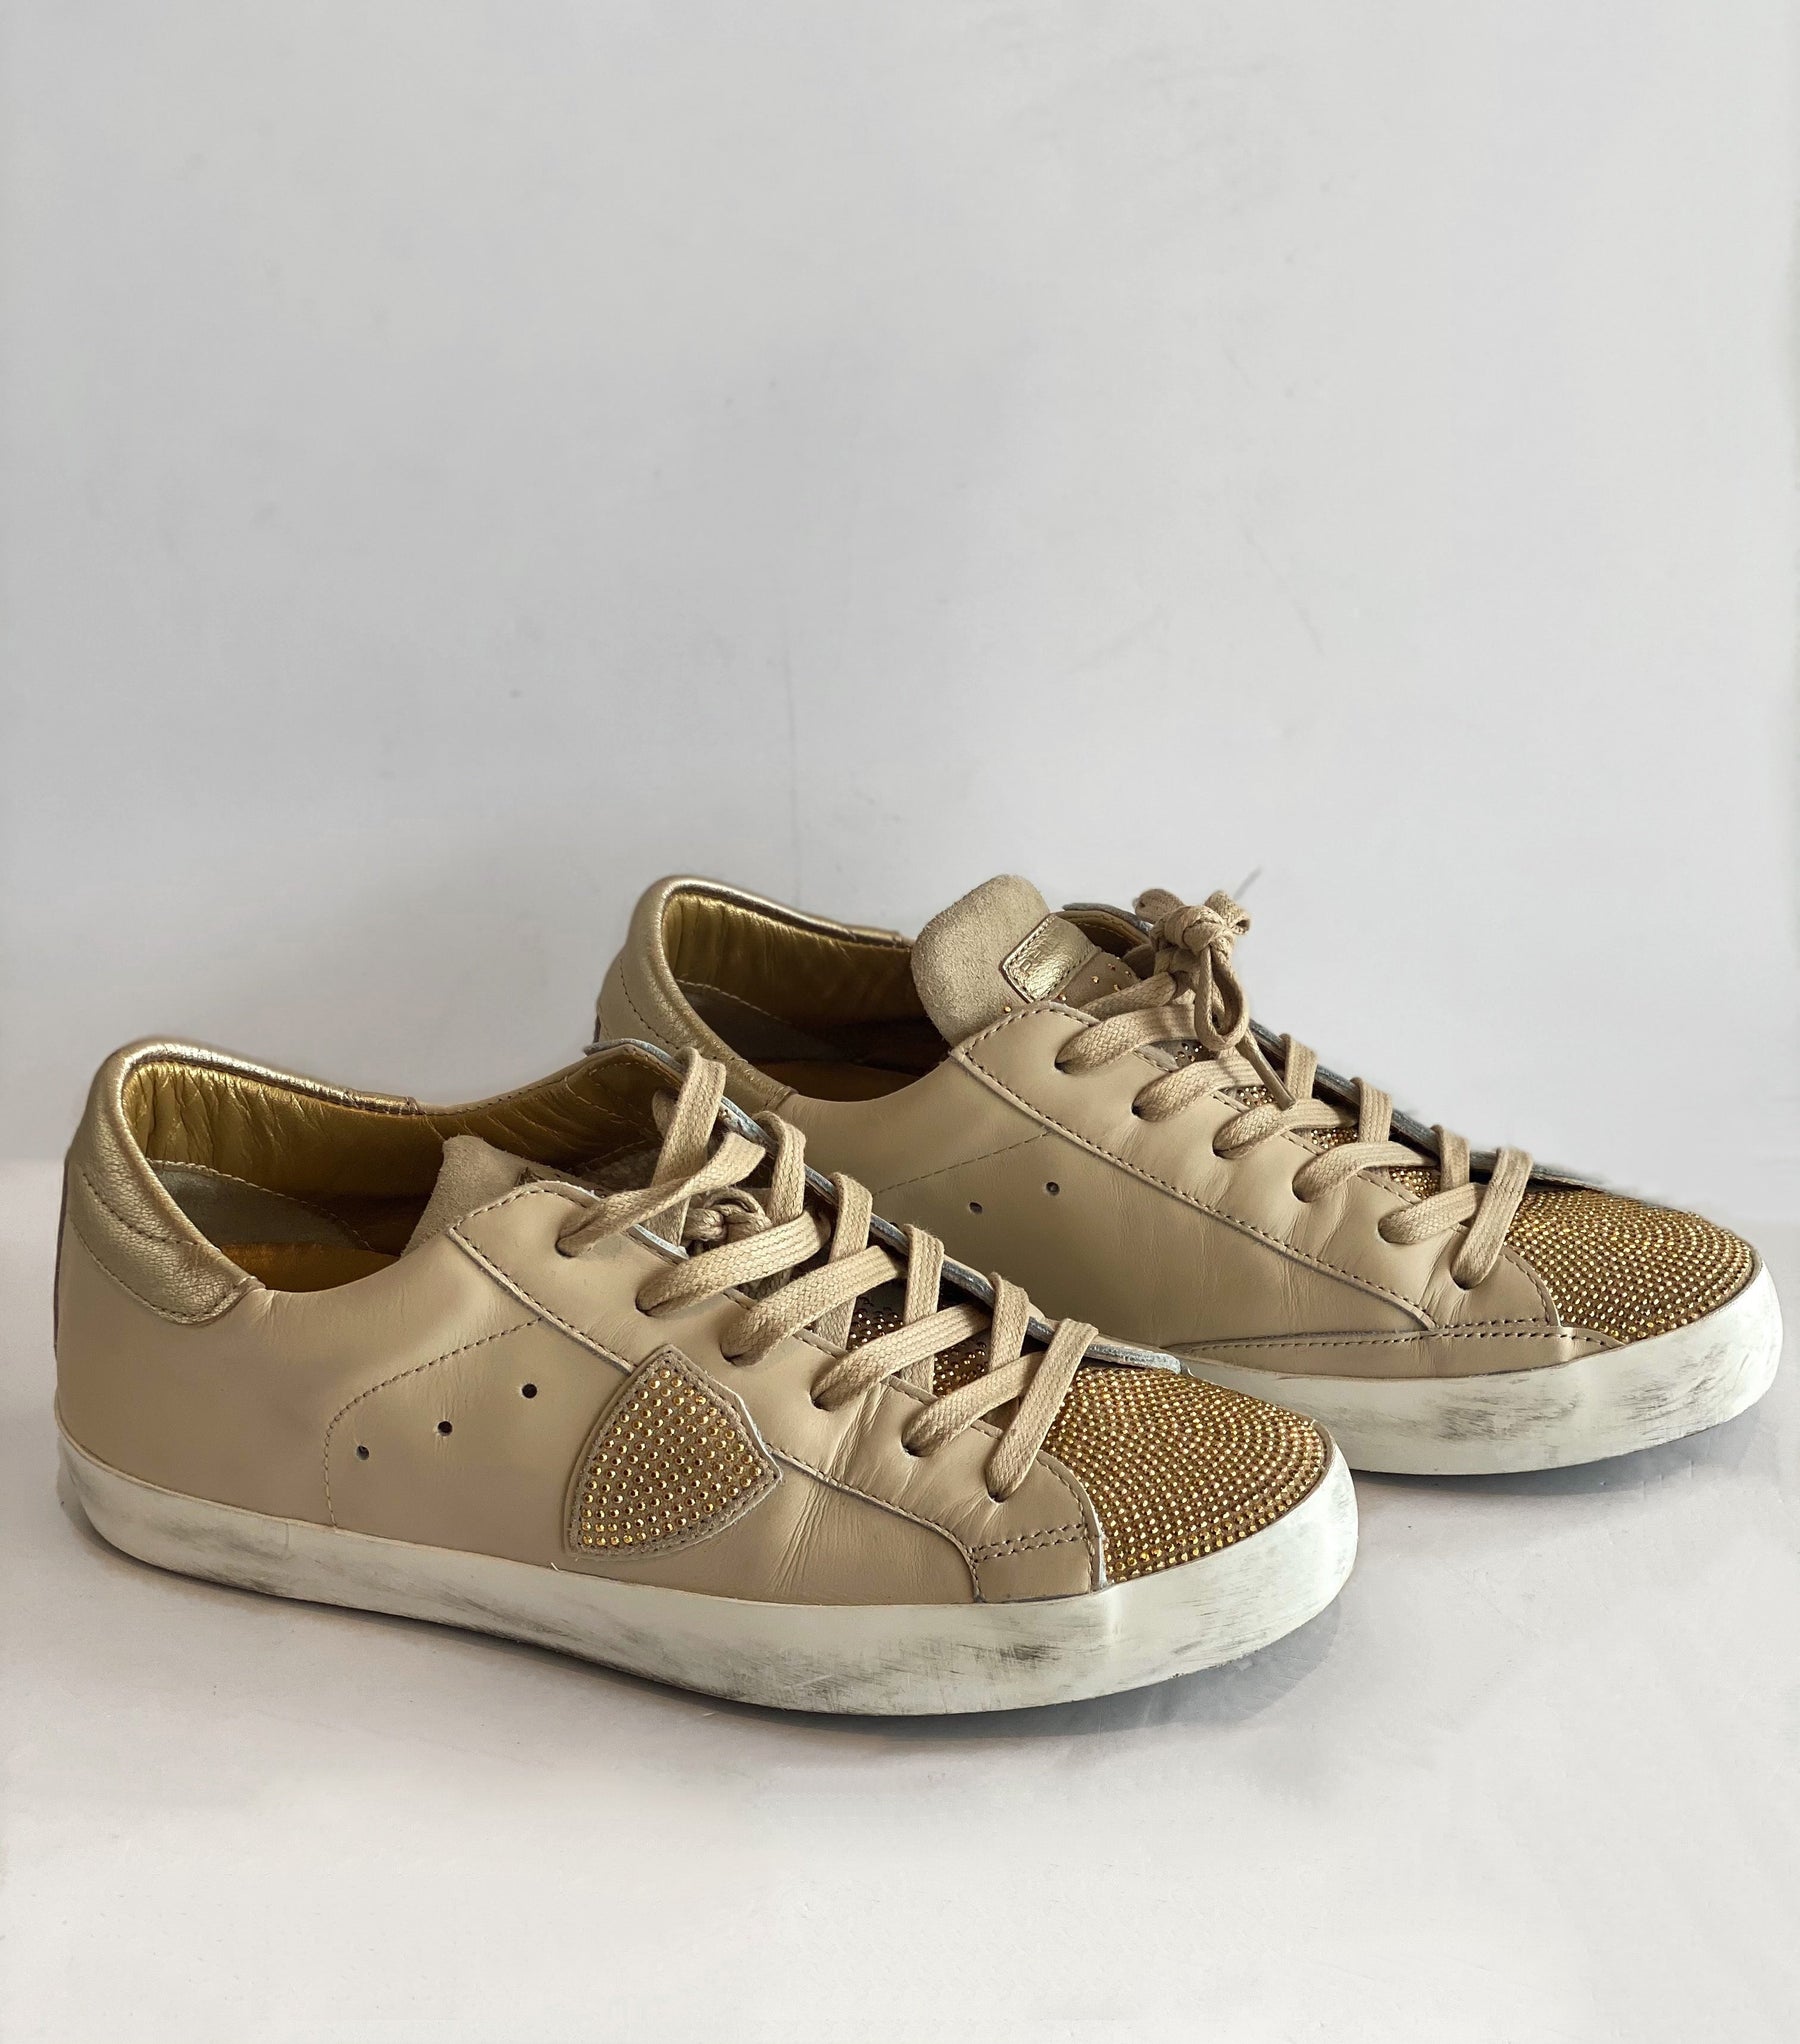 Philippe Model Leather Studded Sneakers side two